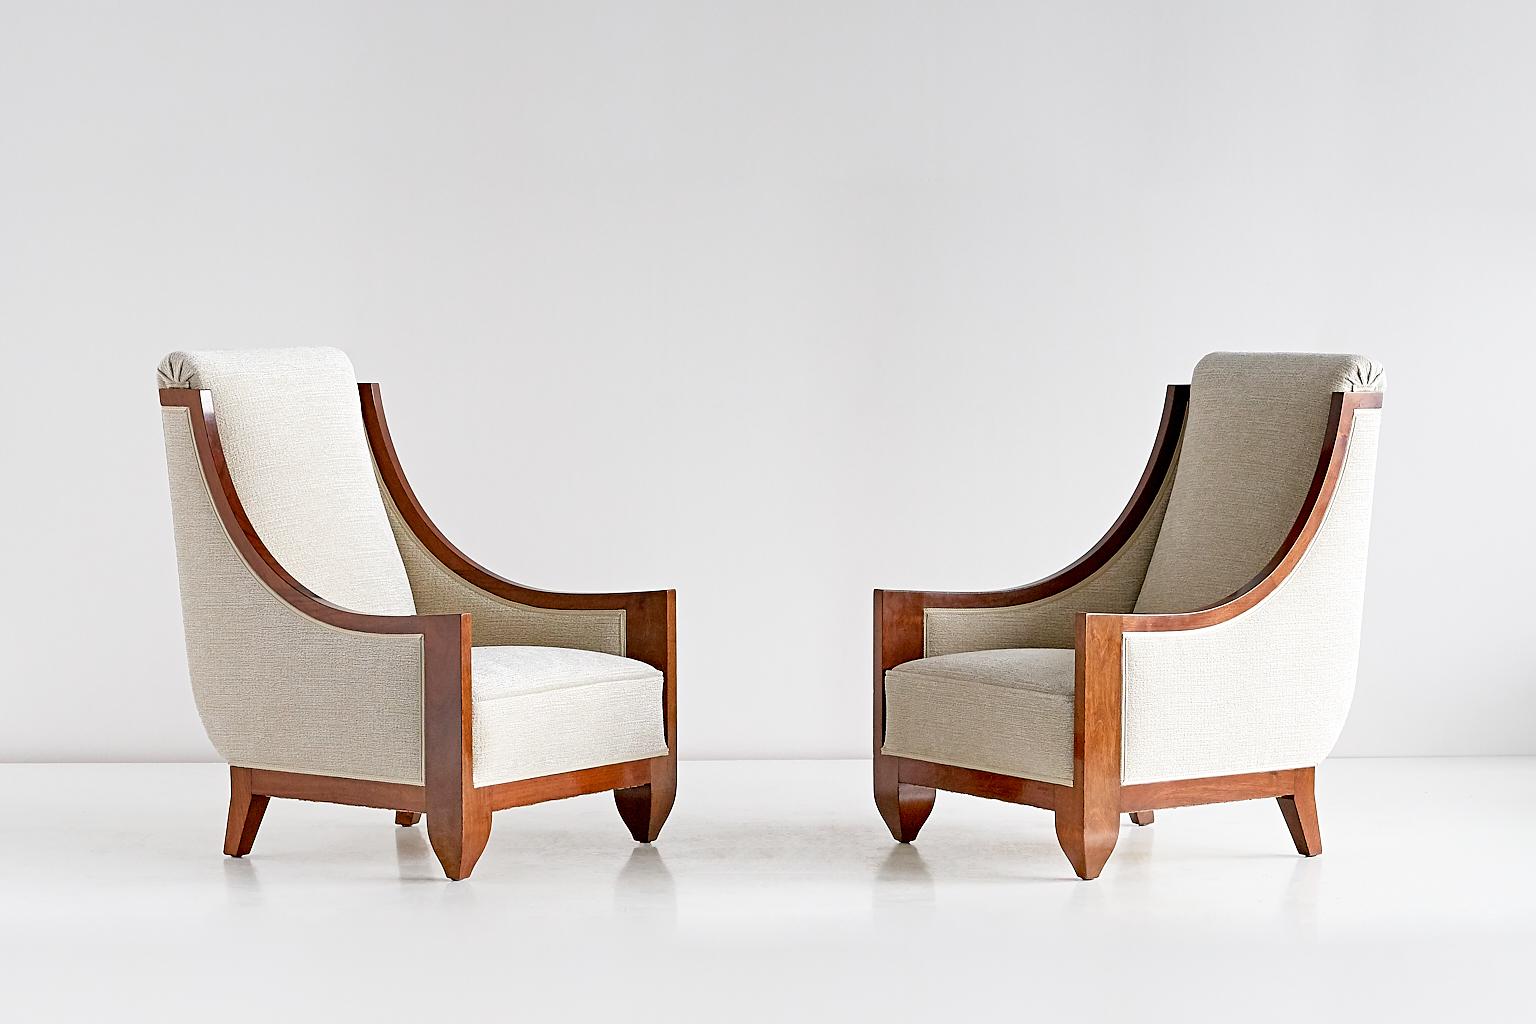 French André Sornay Pair of Art Deco Armchairs in Walnut, France, Late 1920s